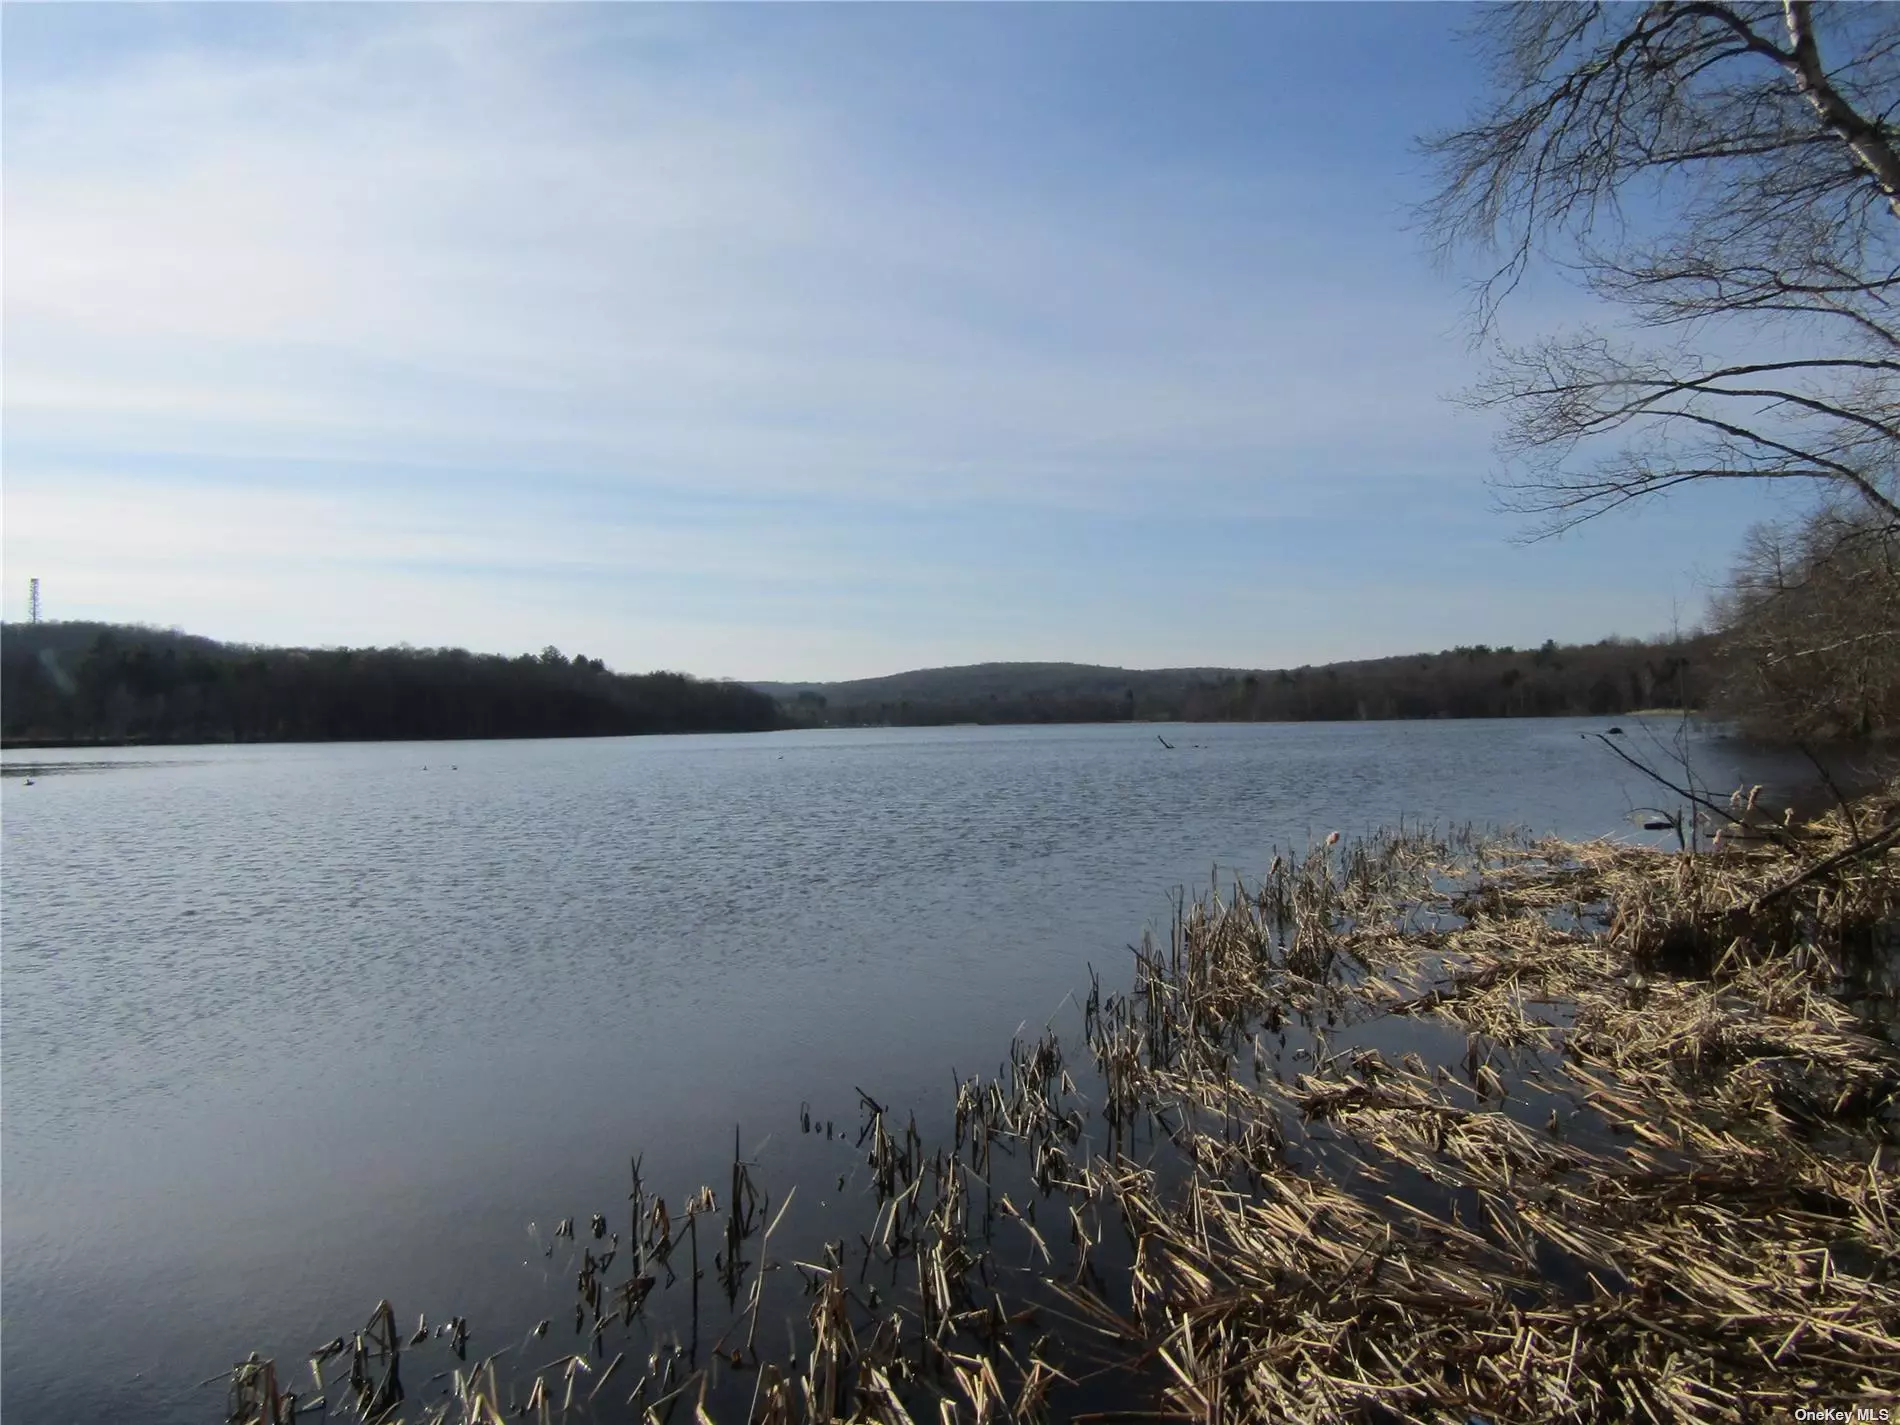 This 82 Acre lake front property features amazing views, woods, fields, streams, and a pond. Also included is a 1 acre lot with a mobile home. A perfect place to enjoy a quite life or getaway, just teeming with fish and wildlife